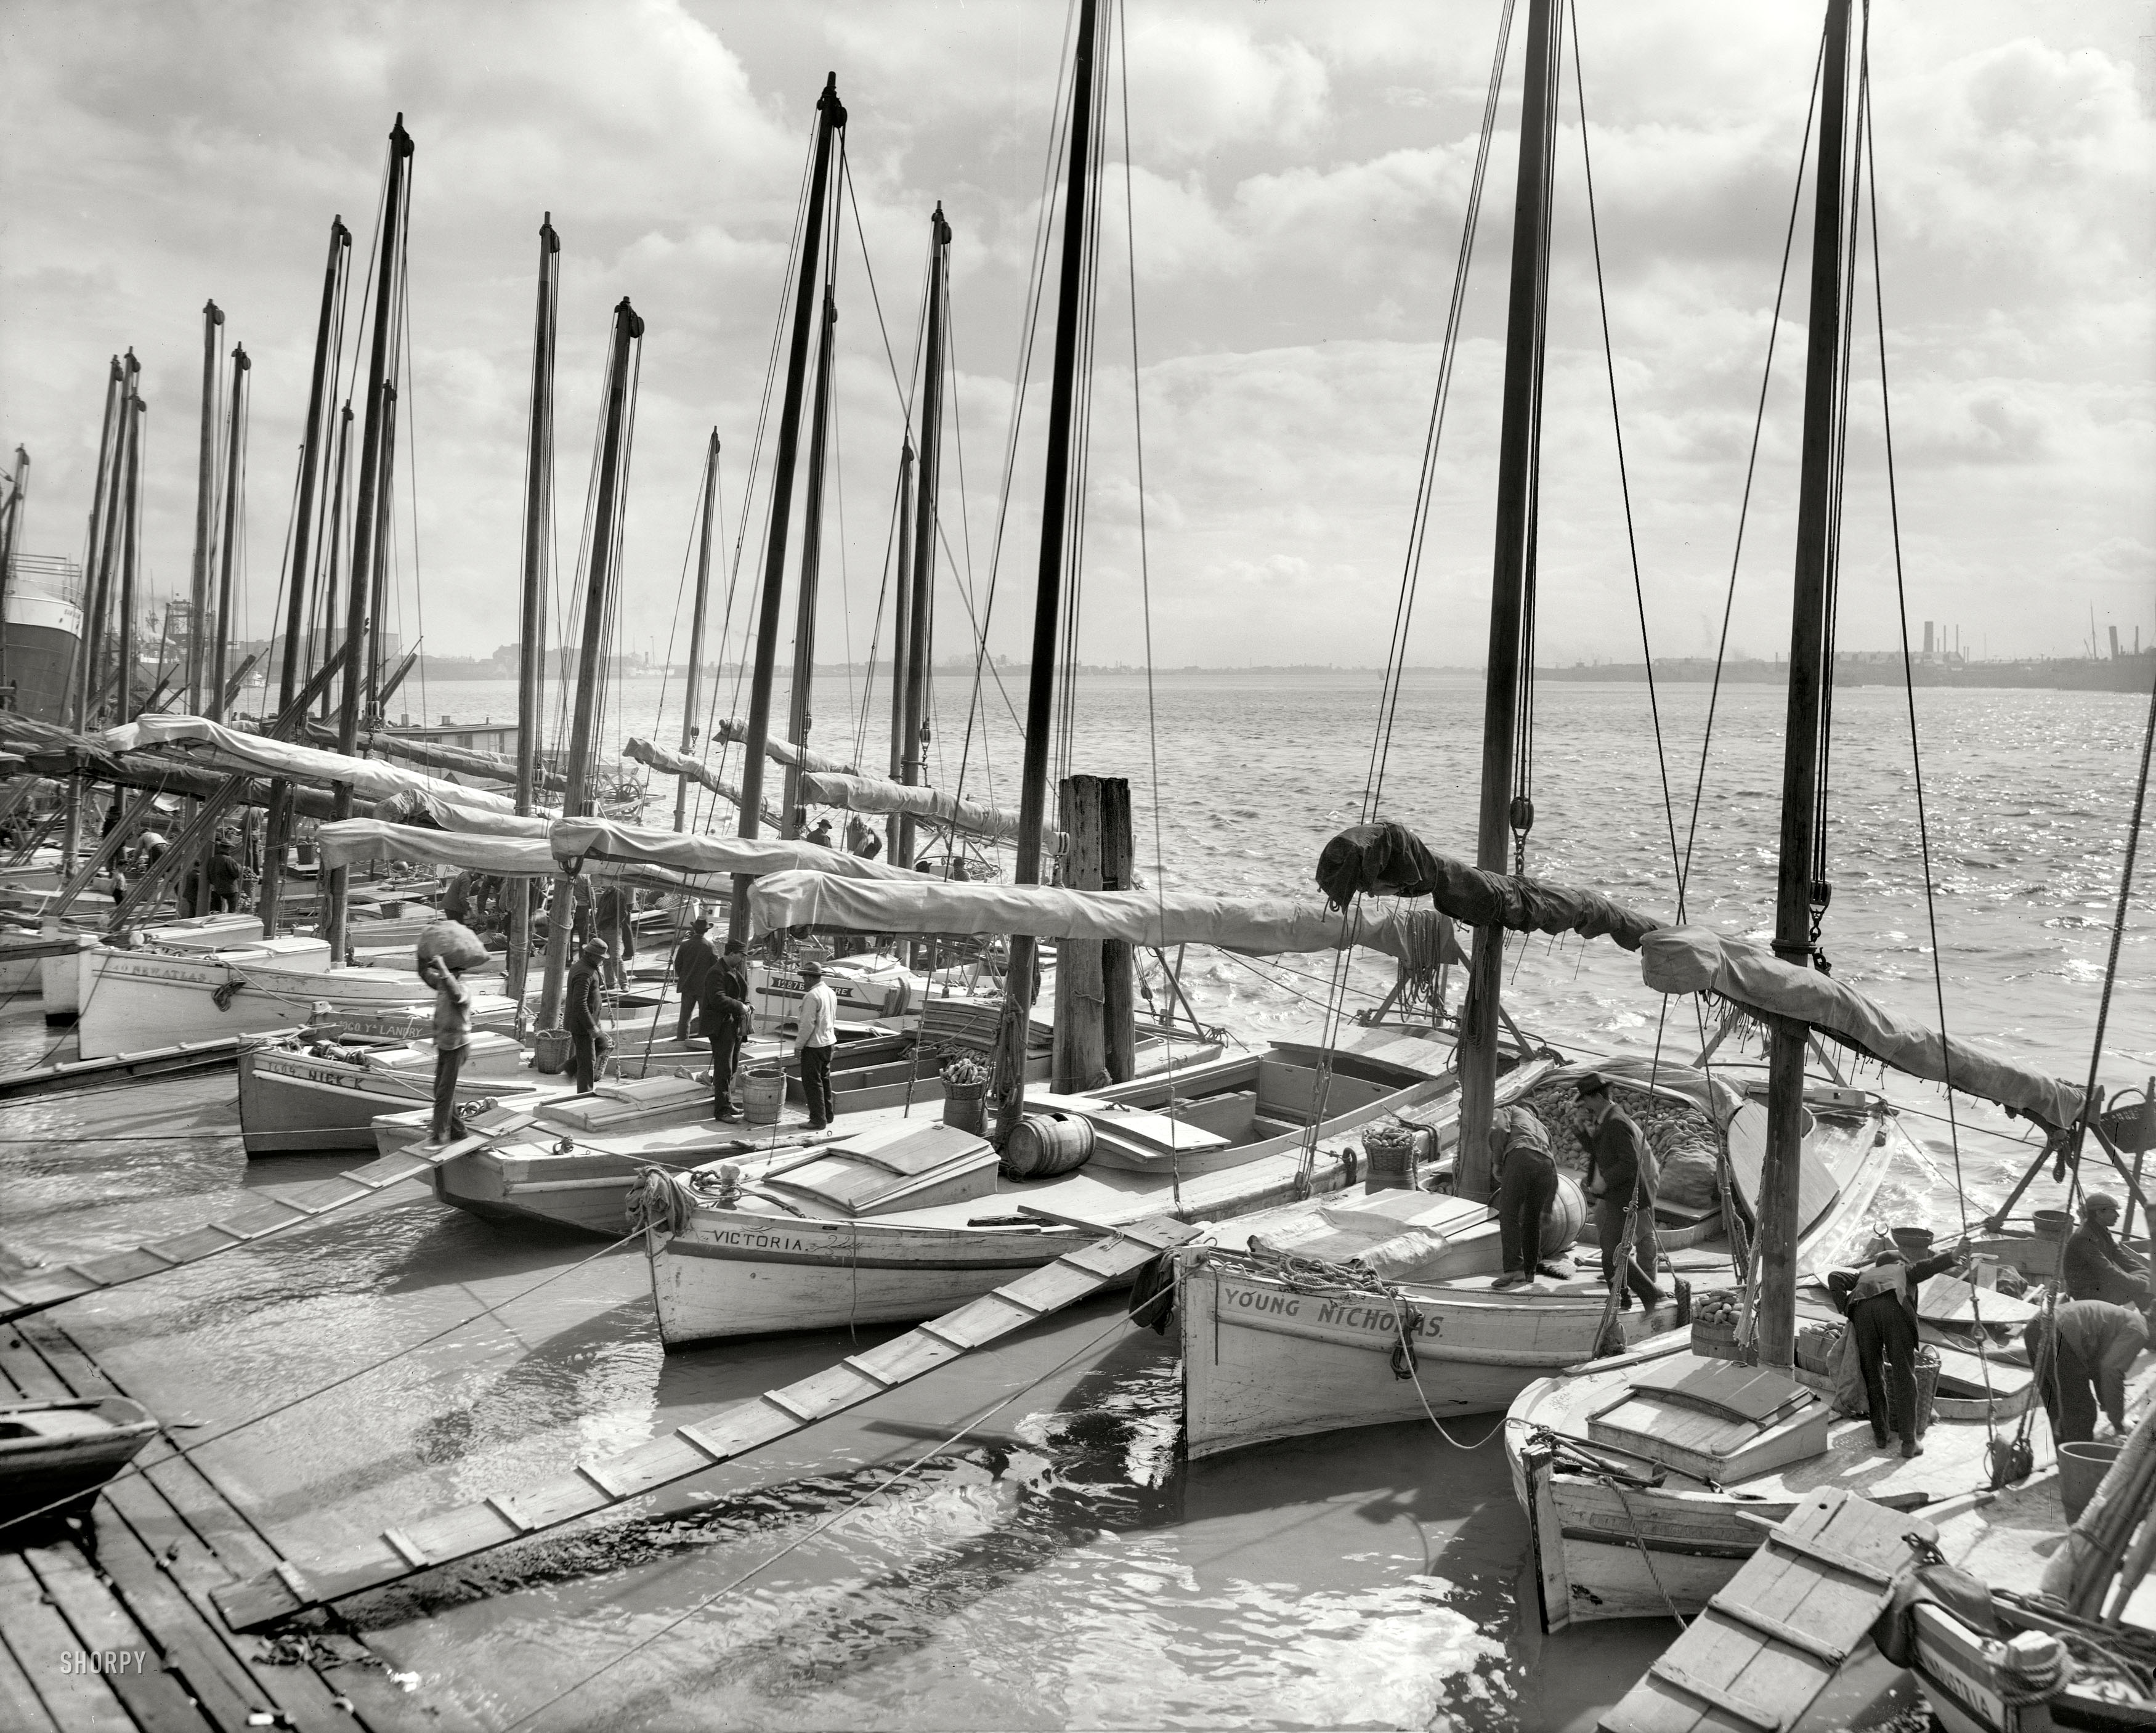 Circa 1906. "Oyster luggers at New Orleans." A continuation of the scene shown in the previous post. Random observation: The masts here remind me of violin bows. 8x10 inch glass negative, Detroit Publishing Company. View full size.